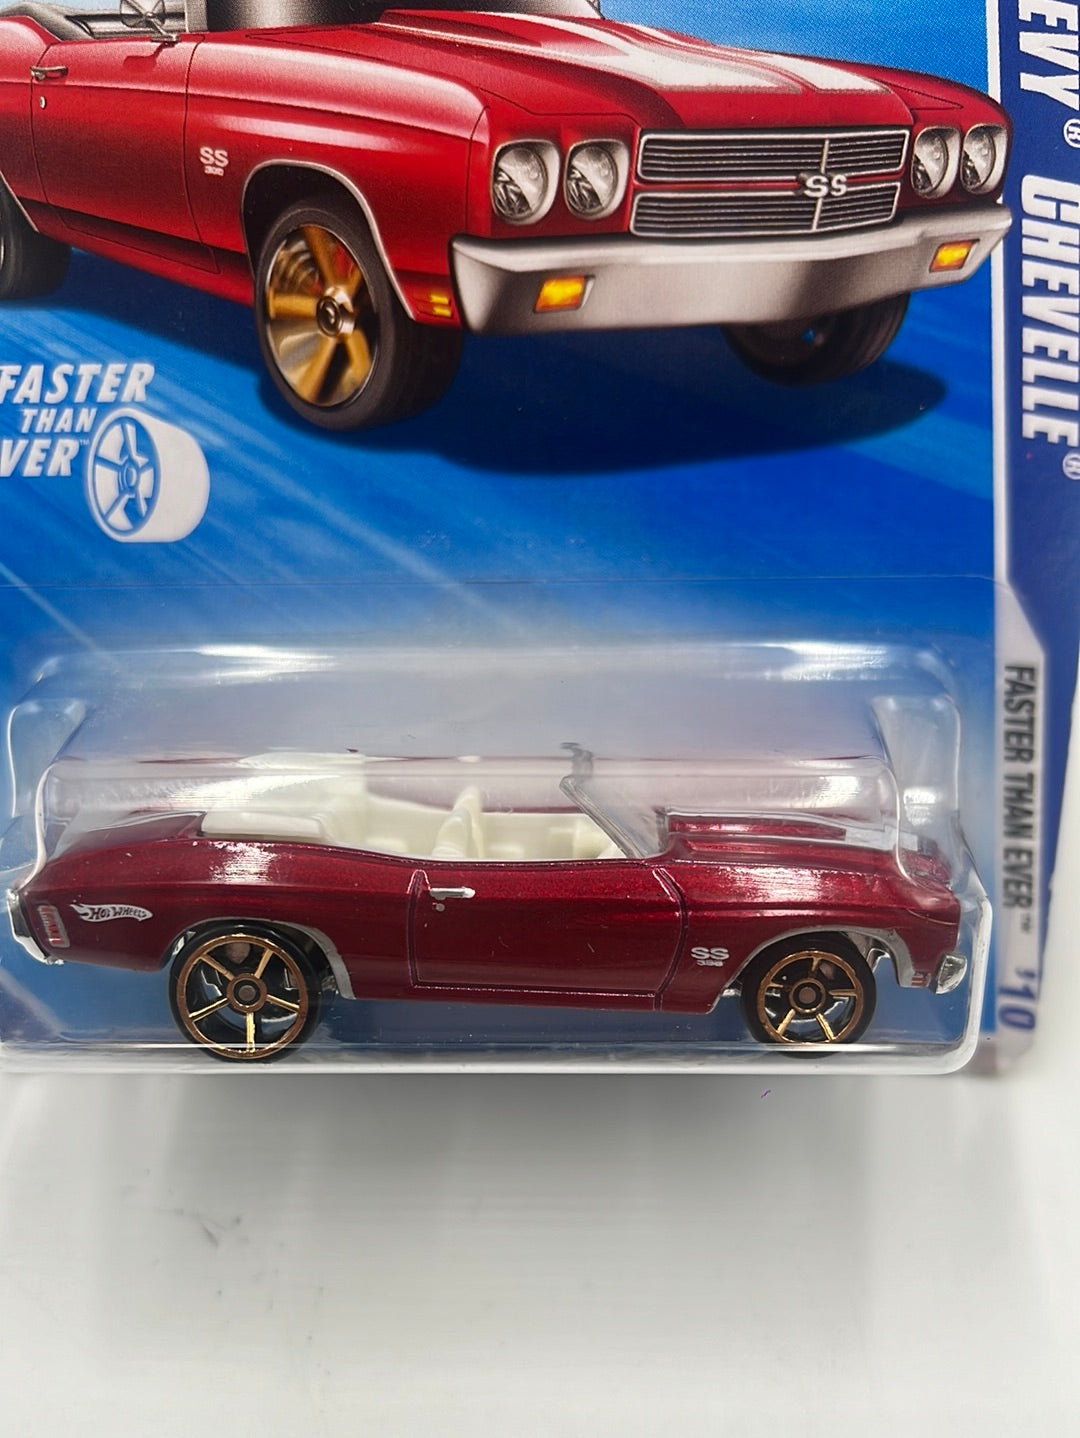 2010 Hot Wheels Faster Than Ever ‘70 Chevy Chevelle Walmart Exclusive Maroon 136/240 3C